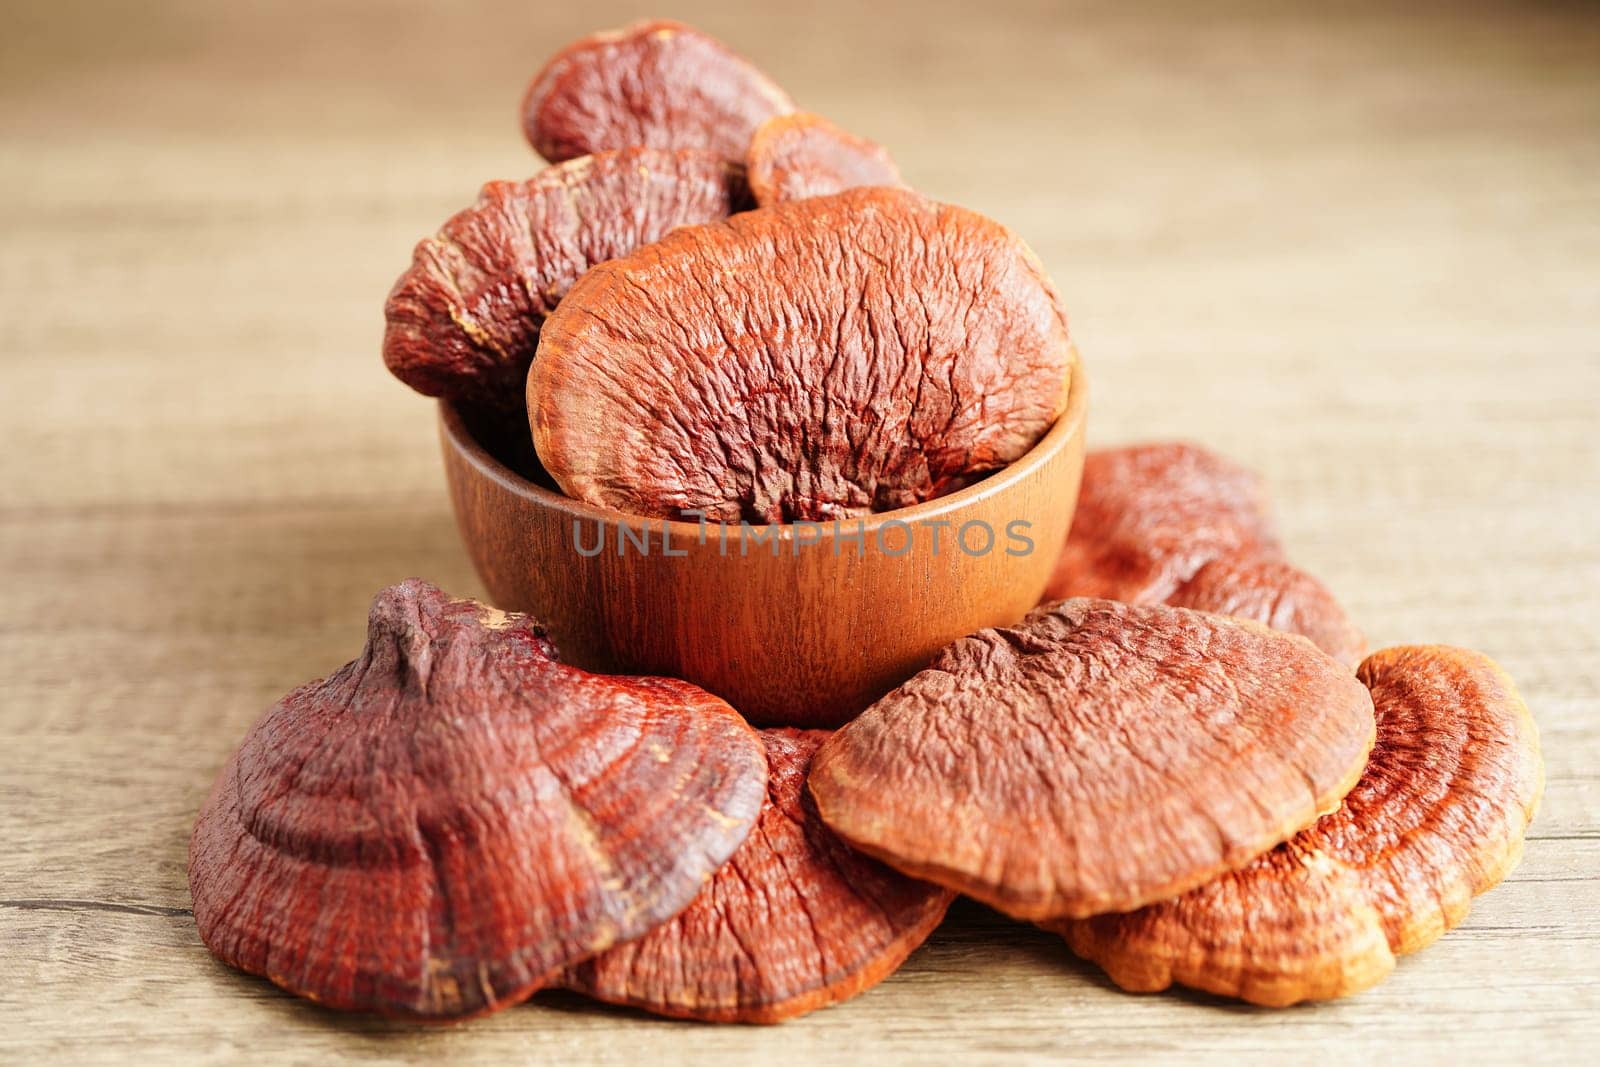 Lingzhi or Reishi mushroom with capsules, organic natural healthy food. by sweettomato